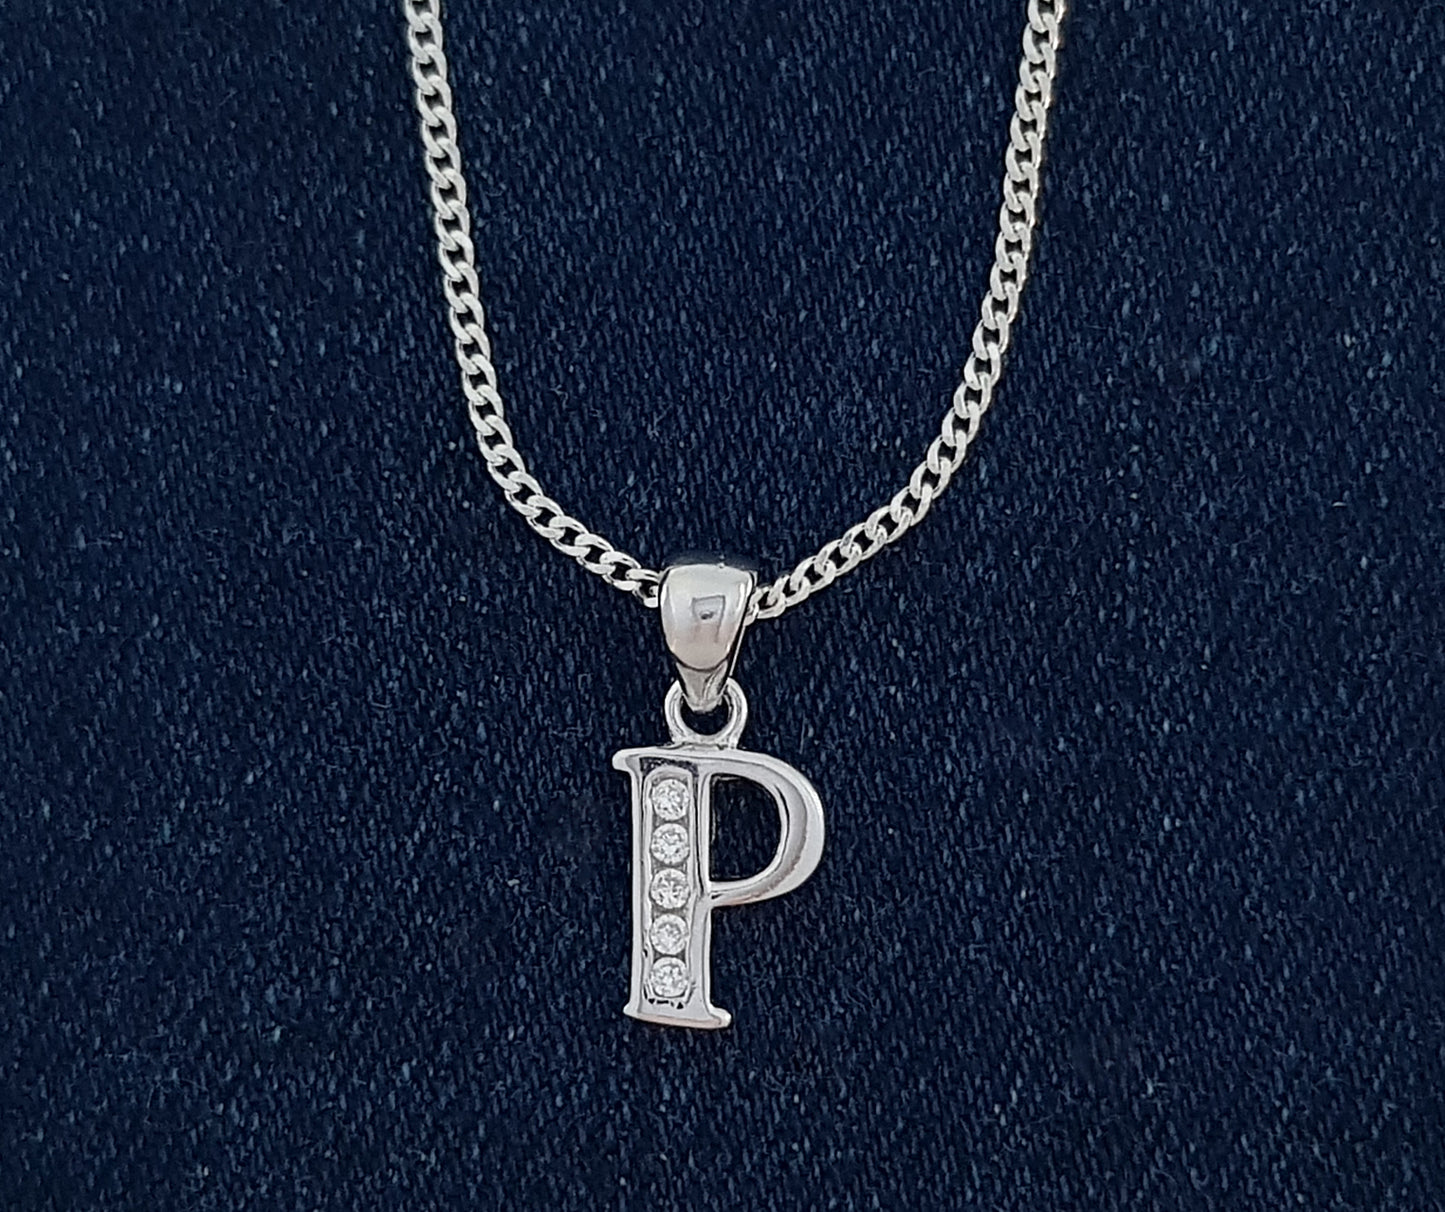 Sterling Silver Initial with Cubic Zirconia Stones- "P" Initial or Letter